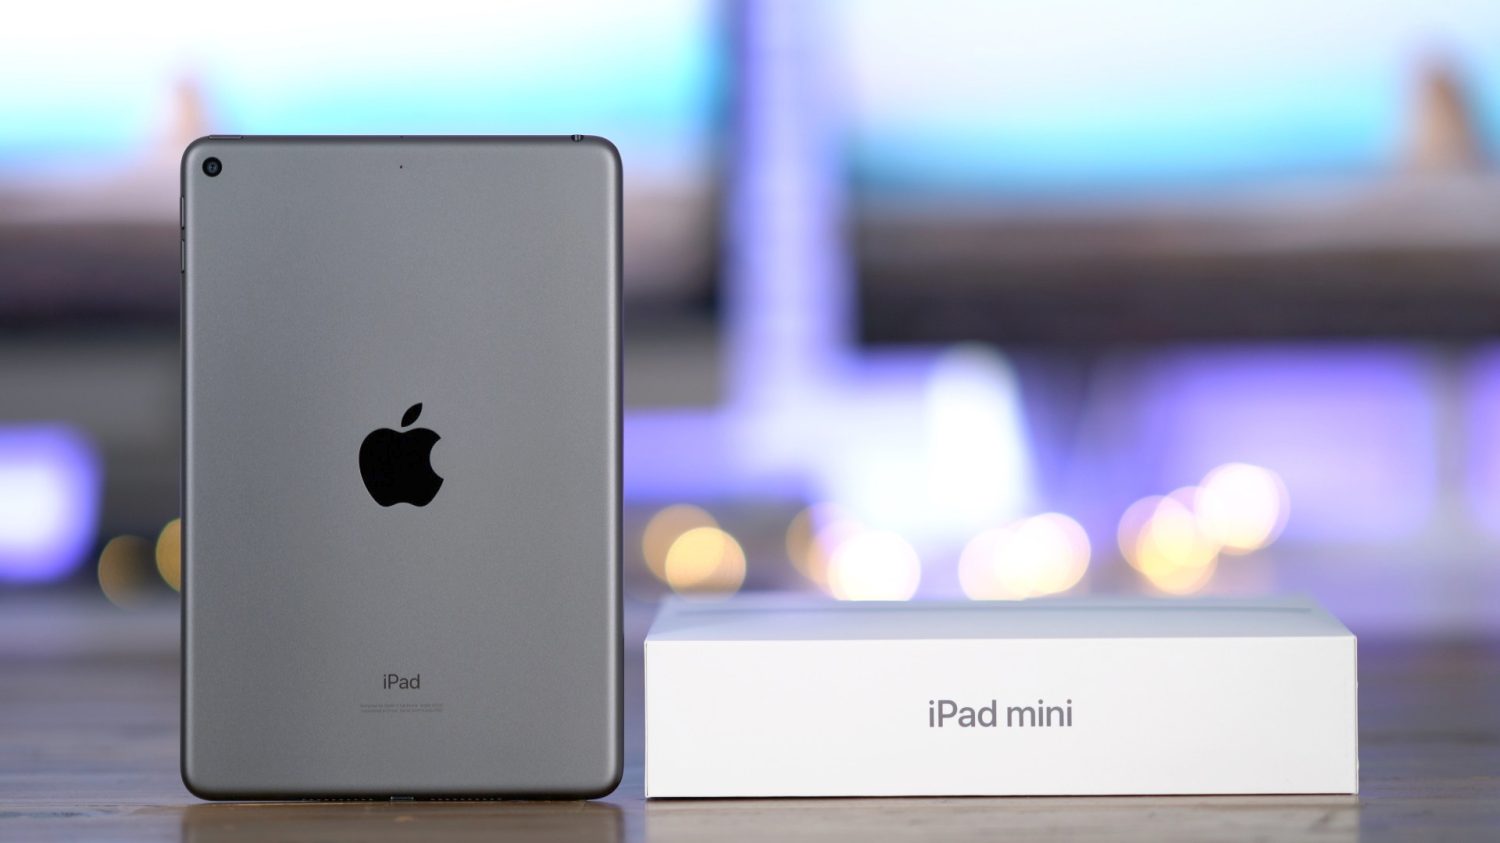 iPad-mini-5-unboxing-and-review-9to5Mac